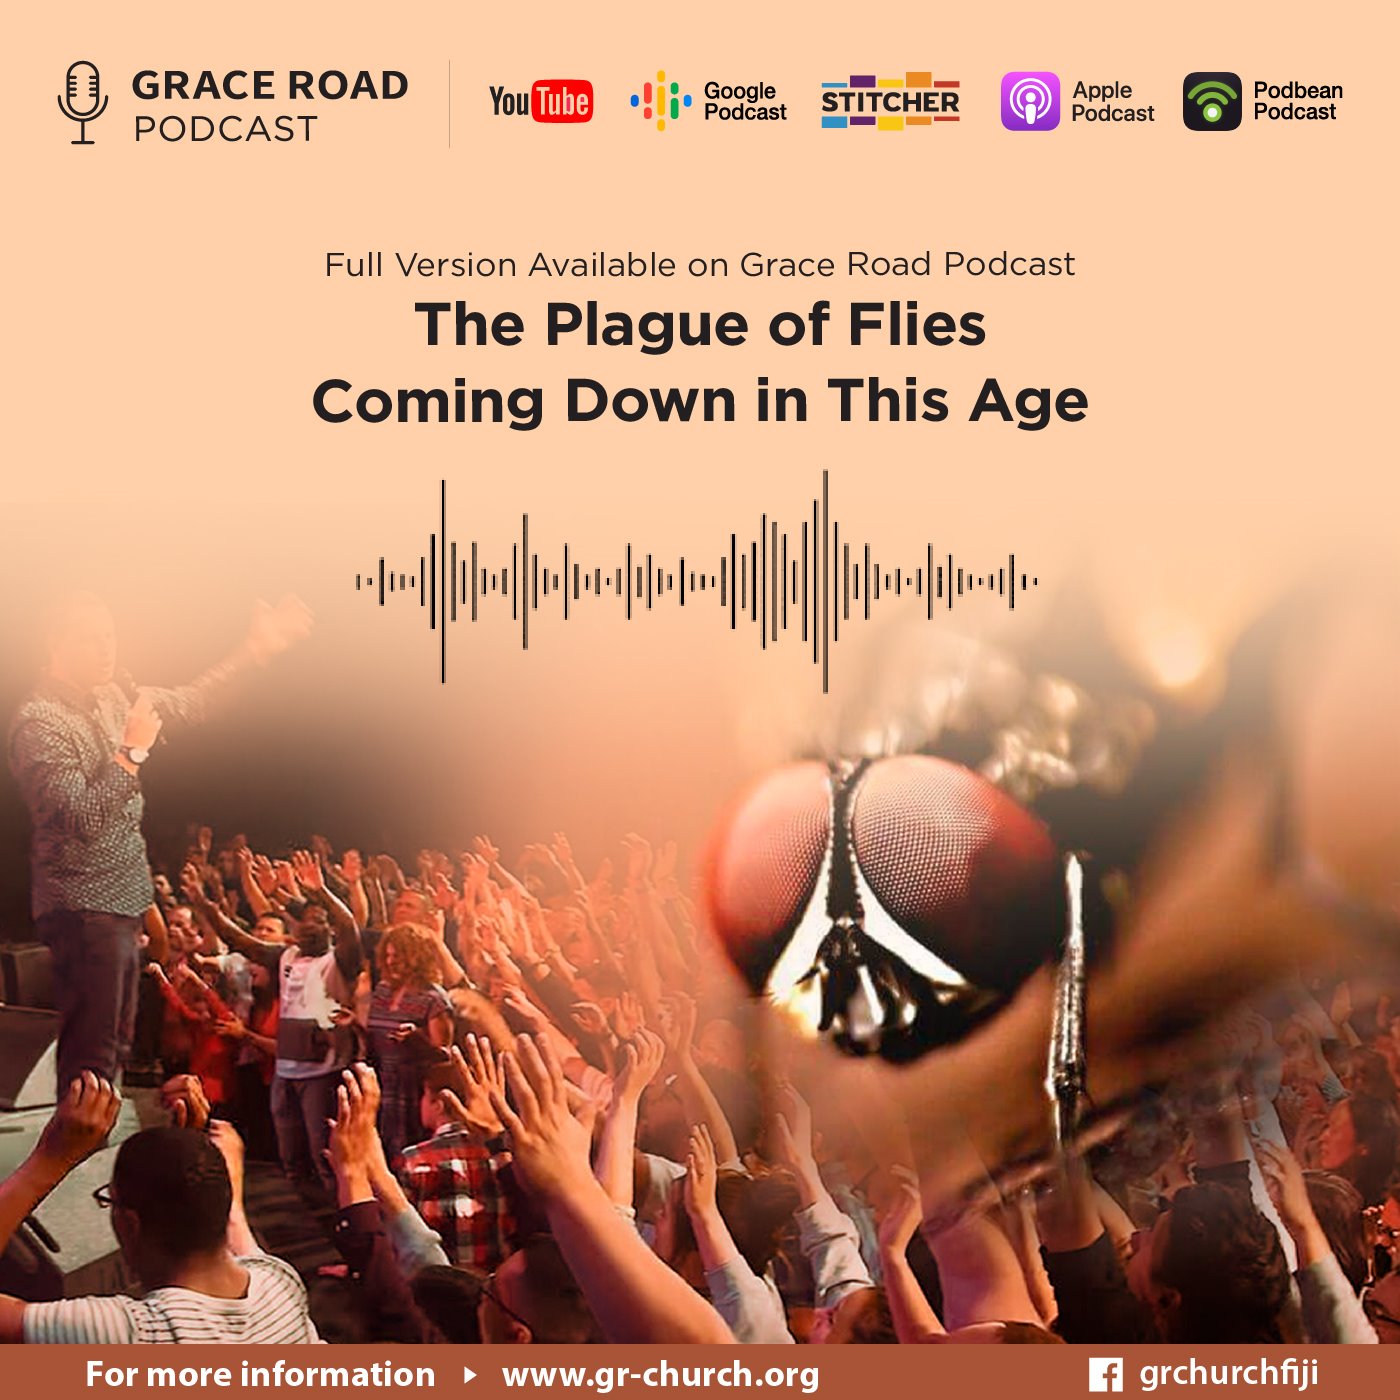 [Trailer] The Plague of Flies Coming Down in This Age